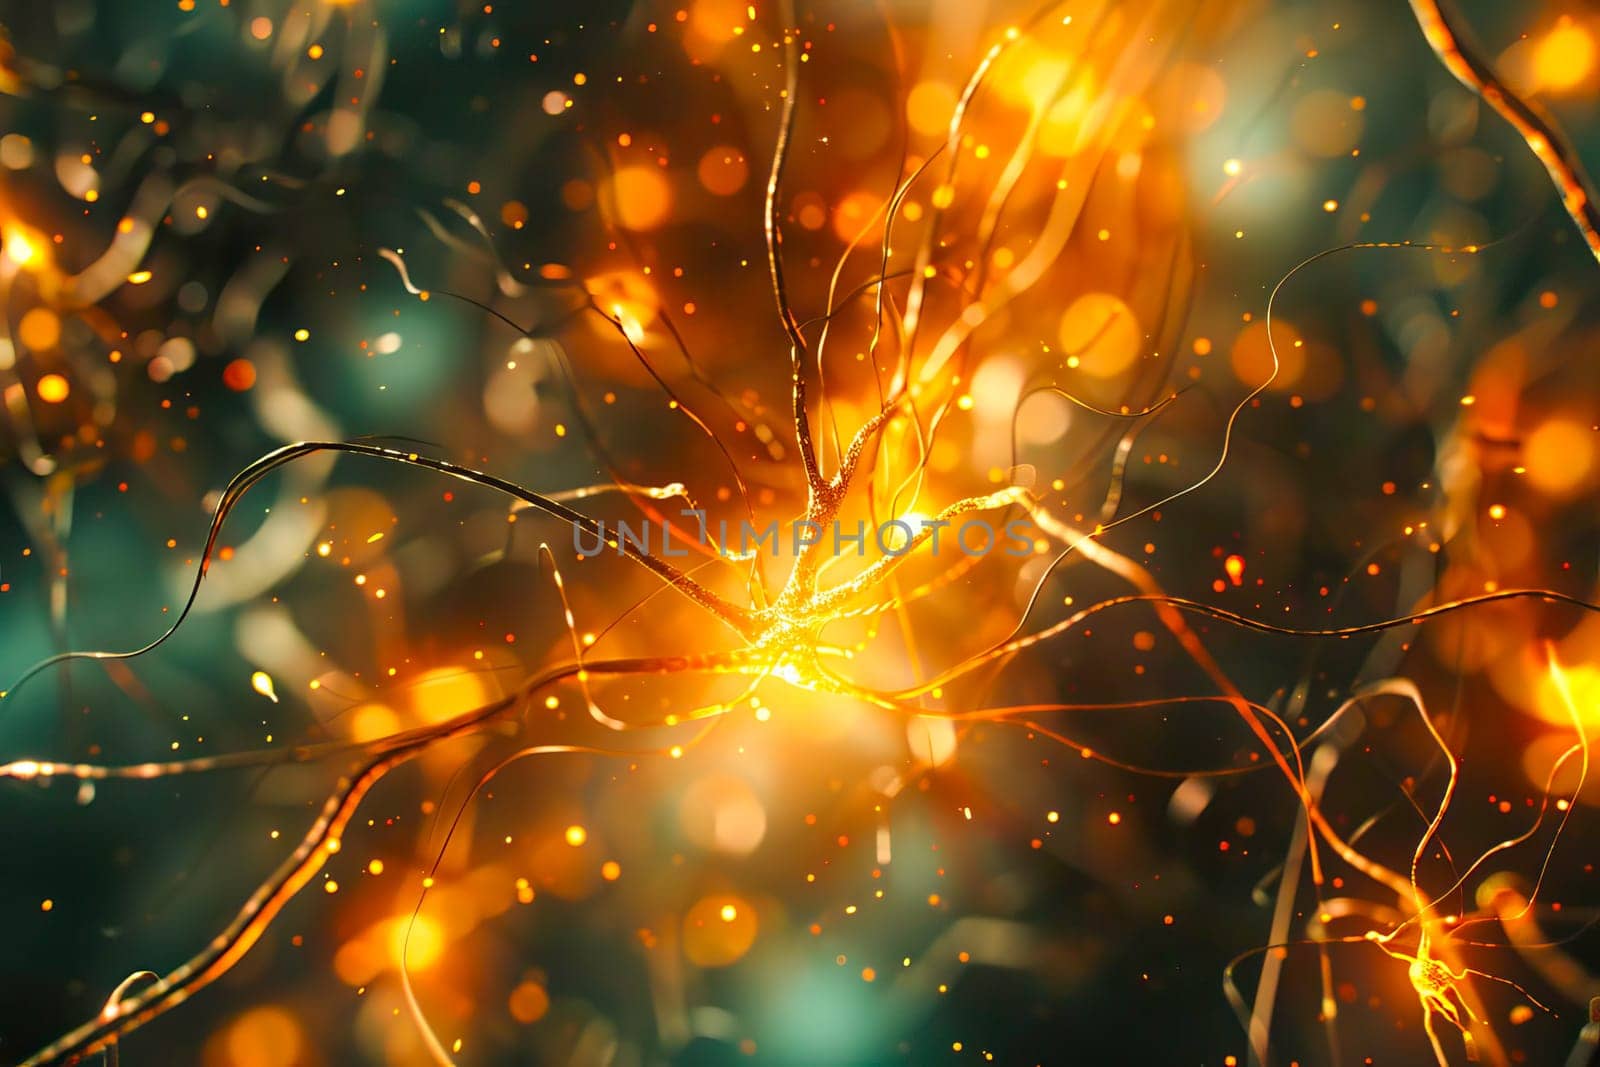 Neurons and synapses engage in electrical activity within the brain.